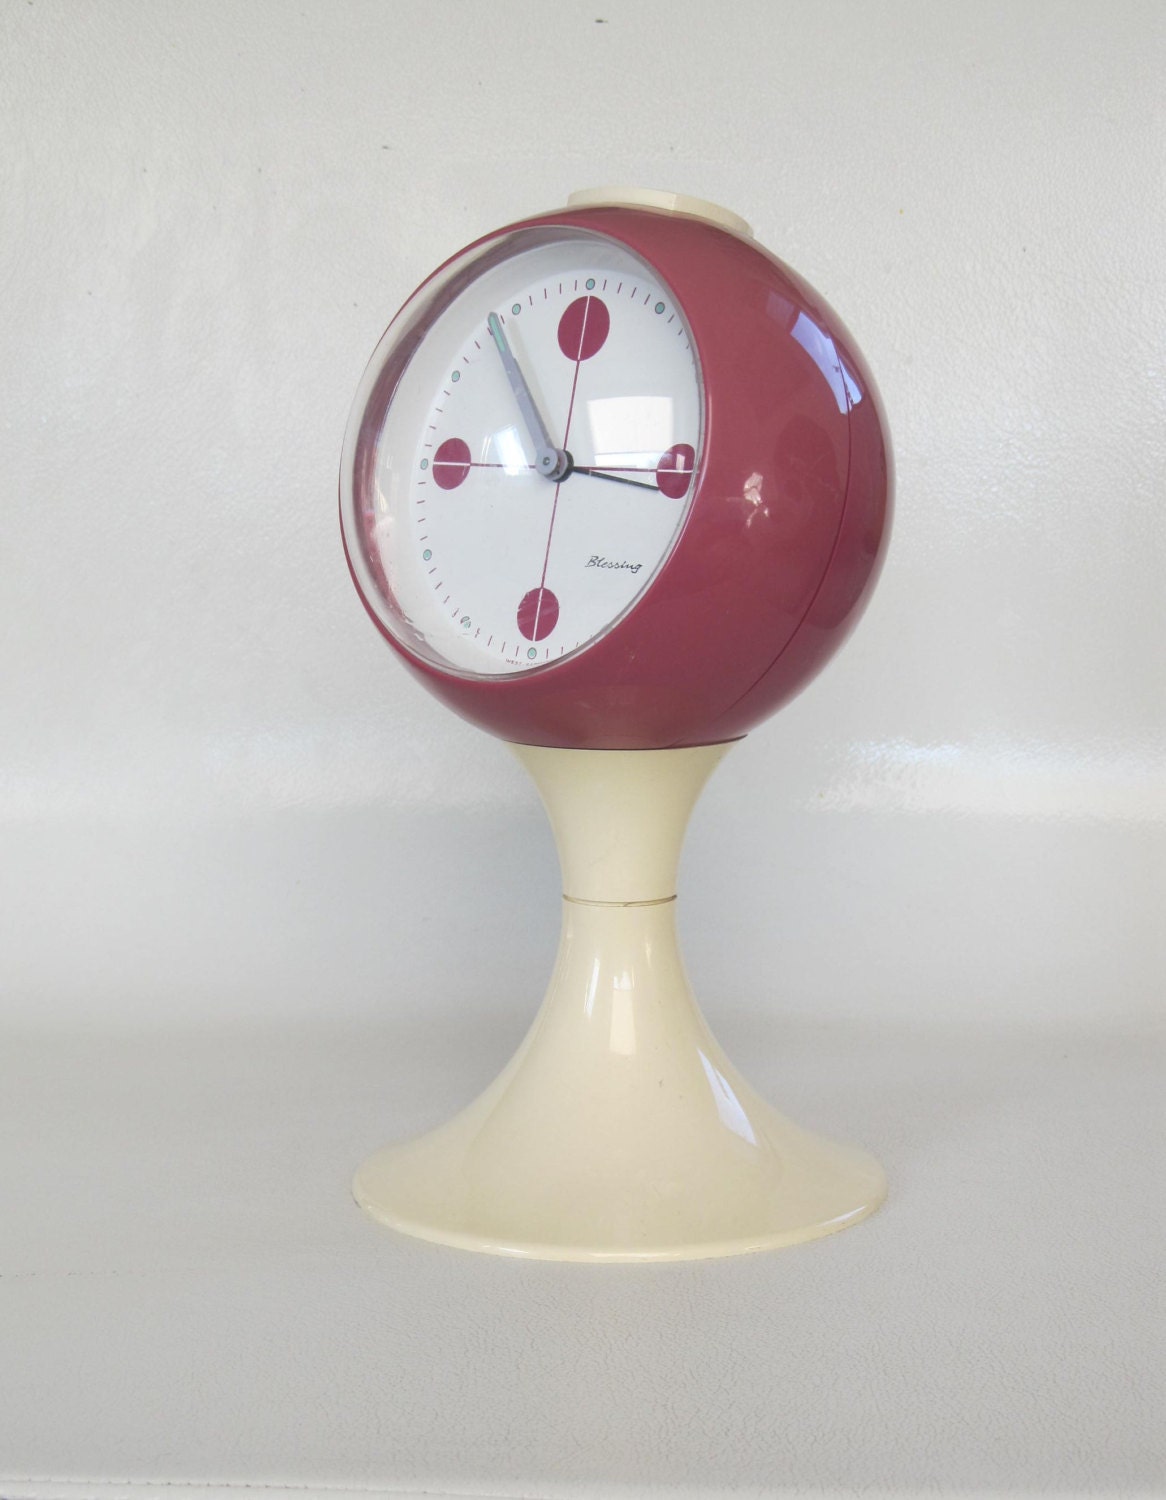 Magenta Blessing alarm clock, white pedestal tulip shape, made in Germany. Space age era, made of plastic from the early 1970s